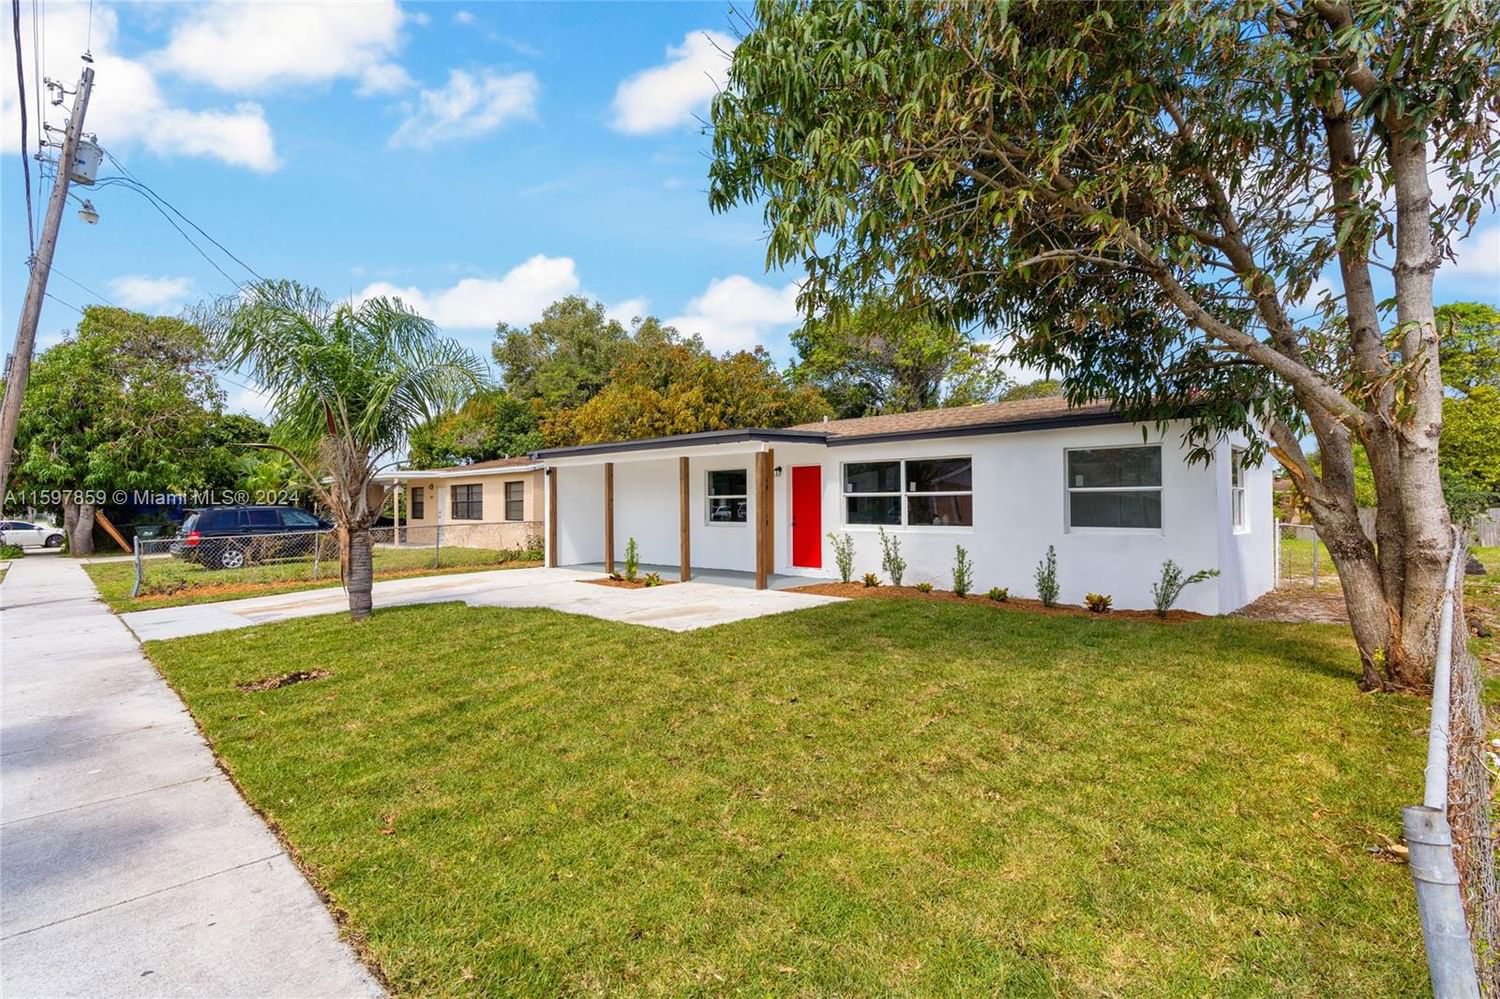 Real estate property located at 813 3rd Ct, Palm Beach County, S/D OF 17-46-43, N 1/2 OF, Delray Beach, FL